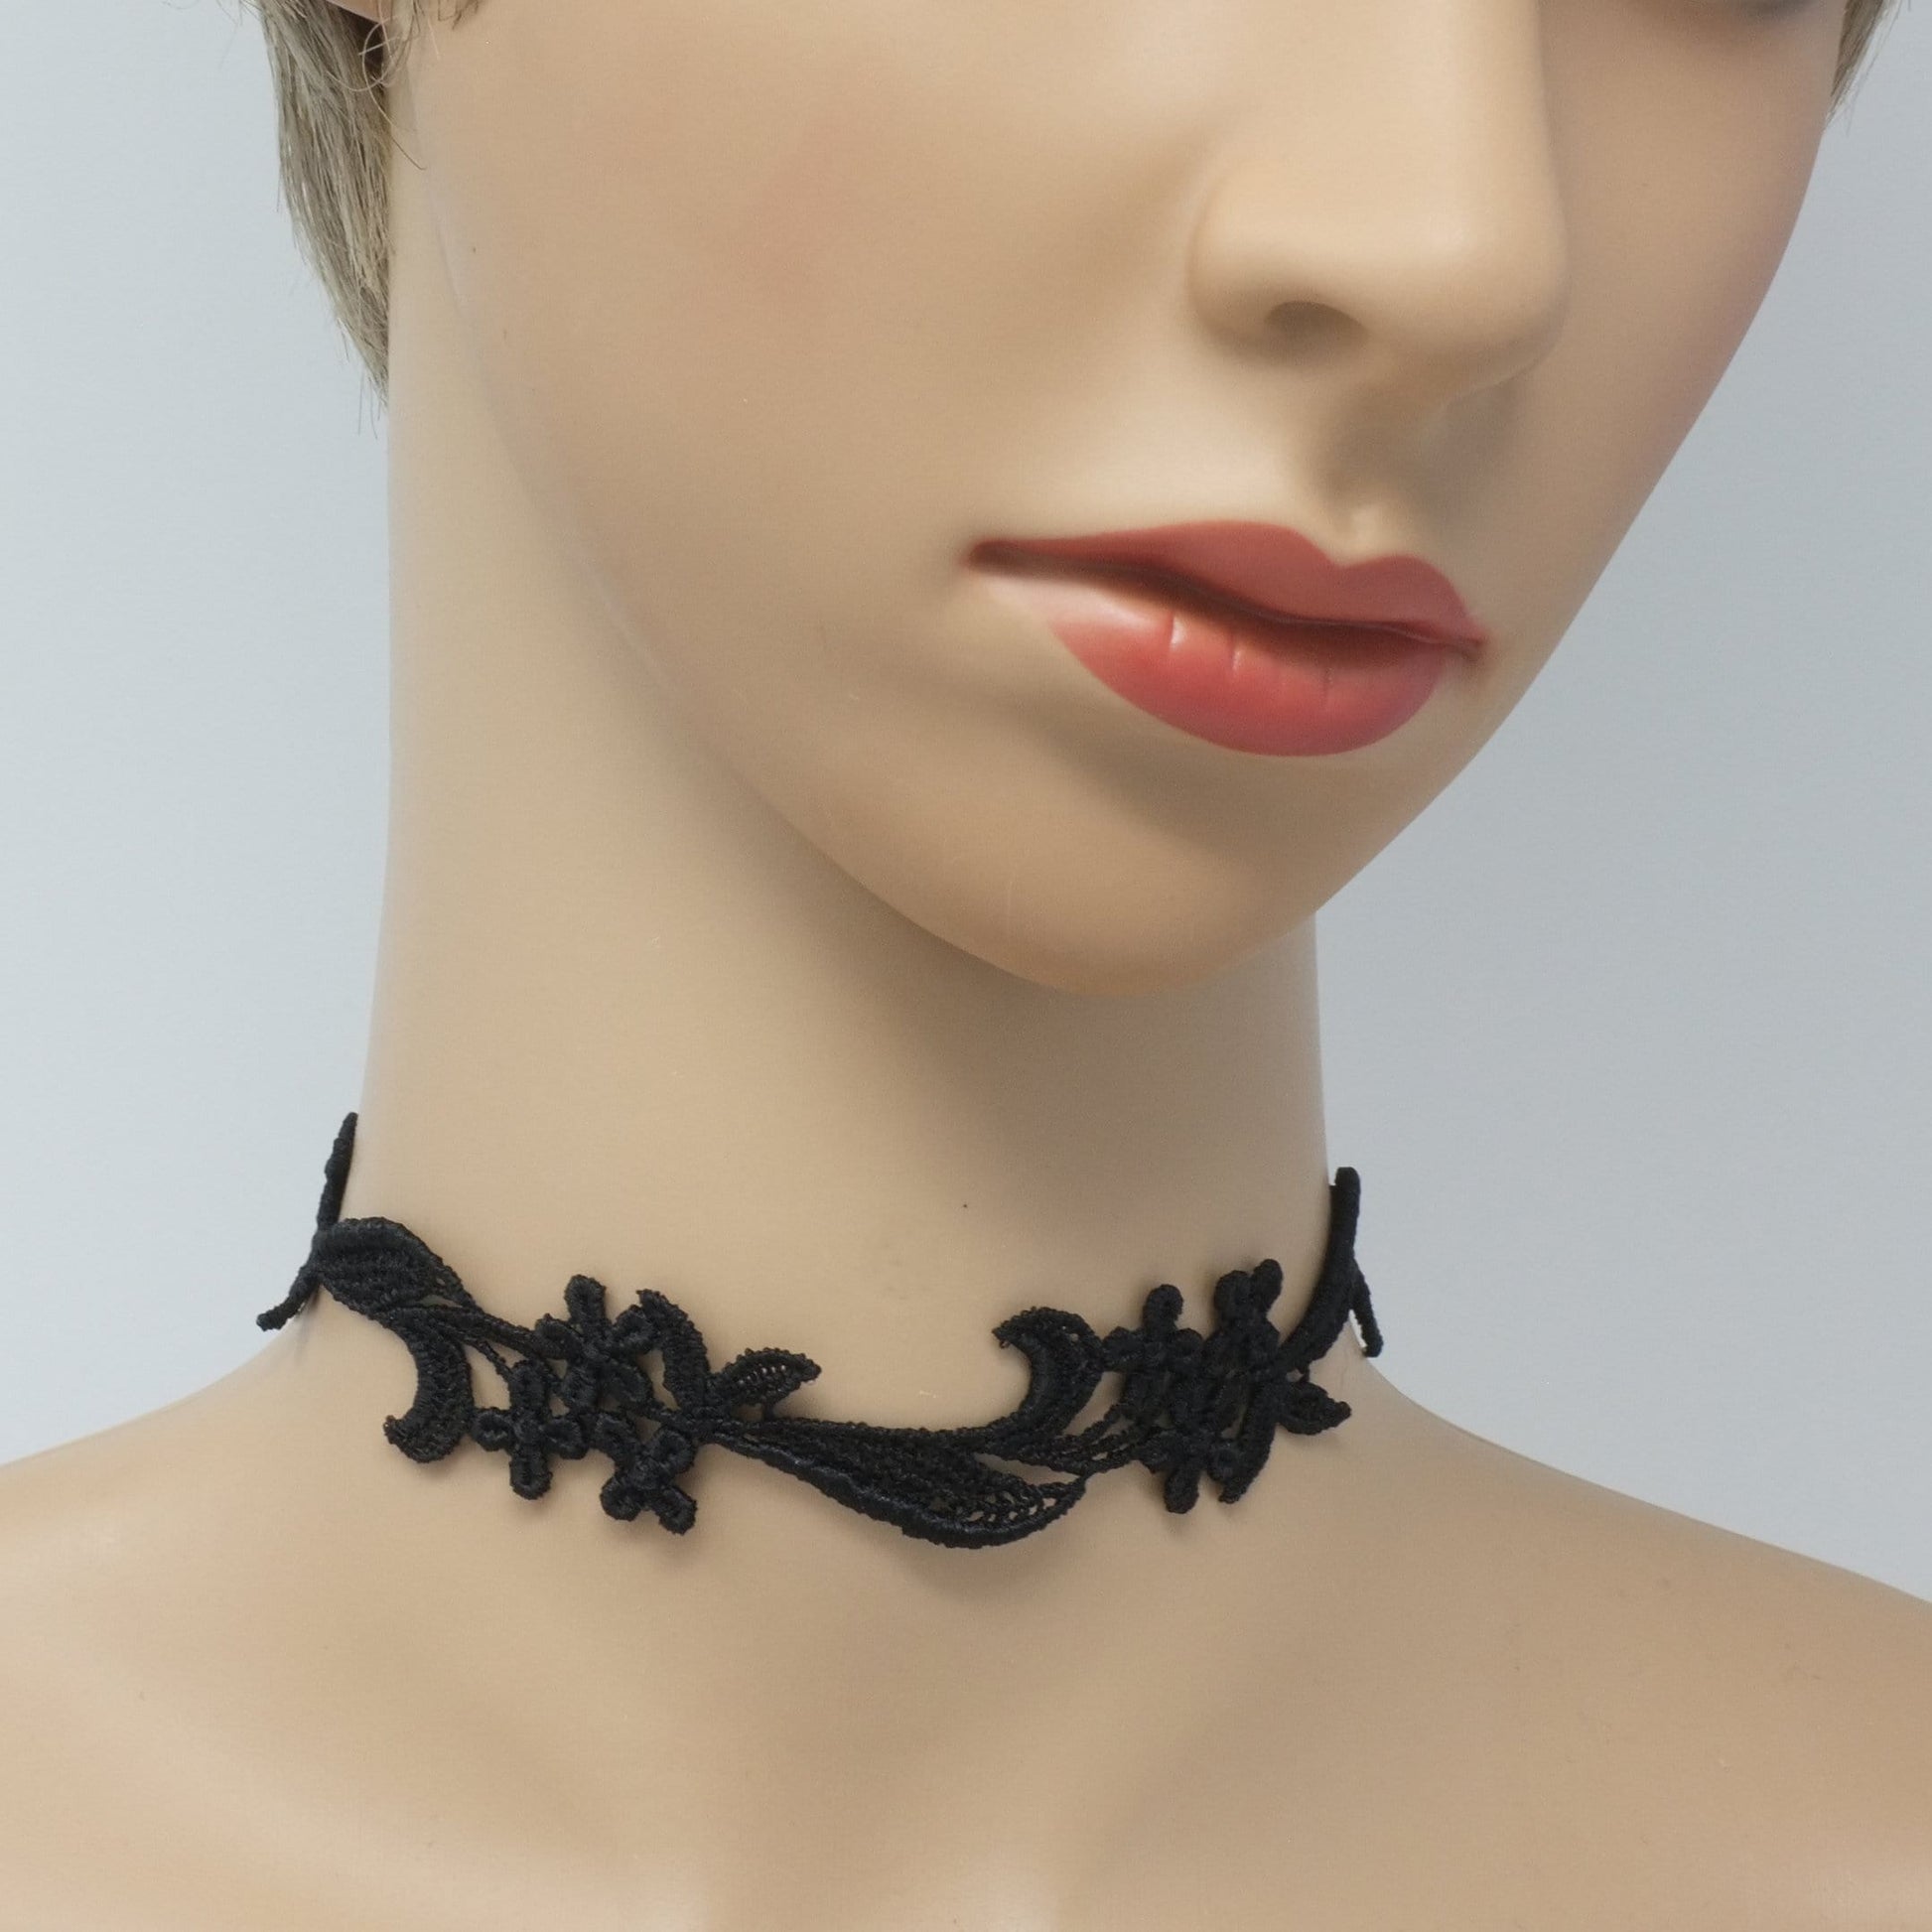 Delicate Choker Necklace with Black Flowers